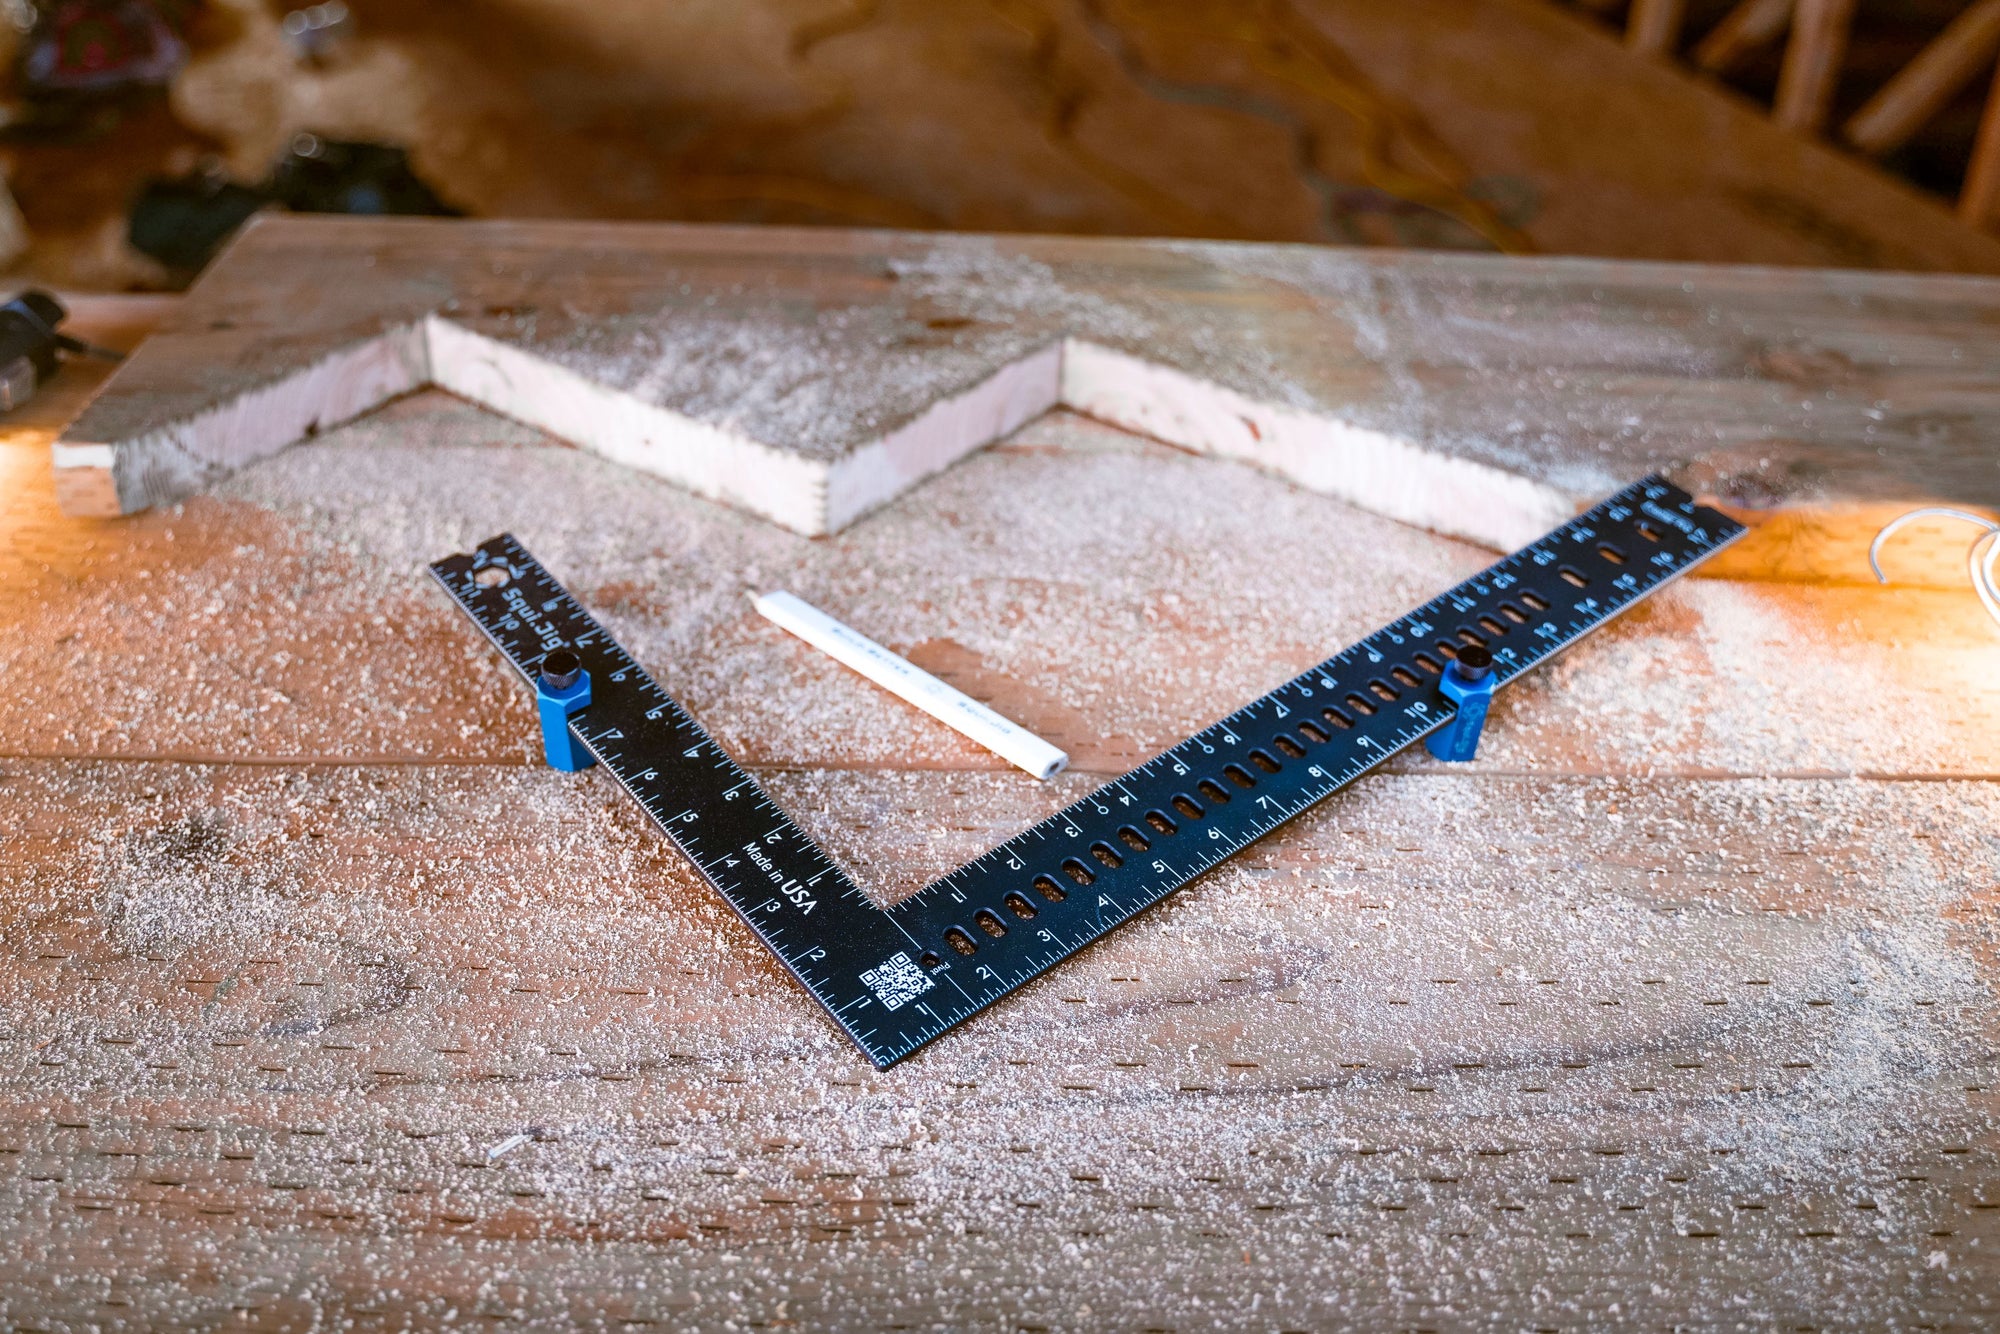 Tall Stair Gauges for Framing Square, Framing Jig for Easier and